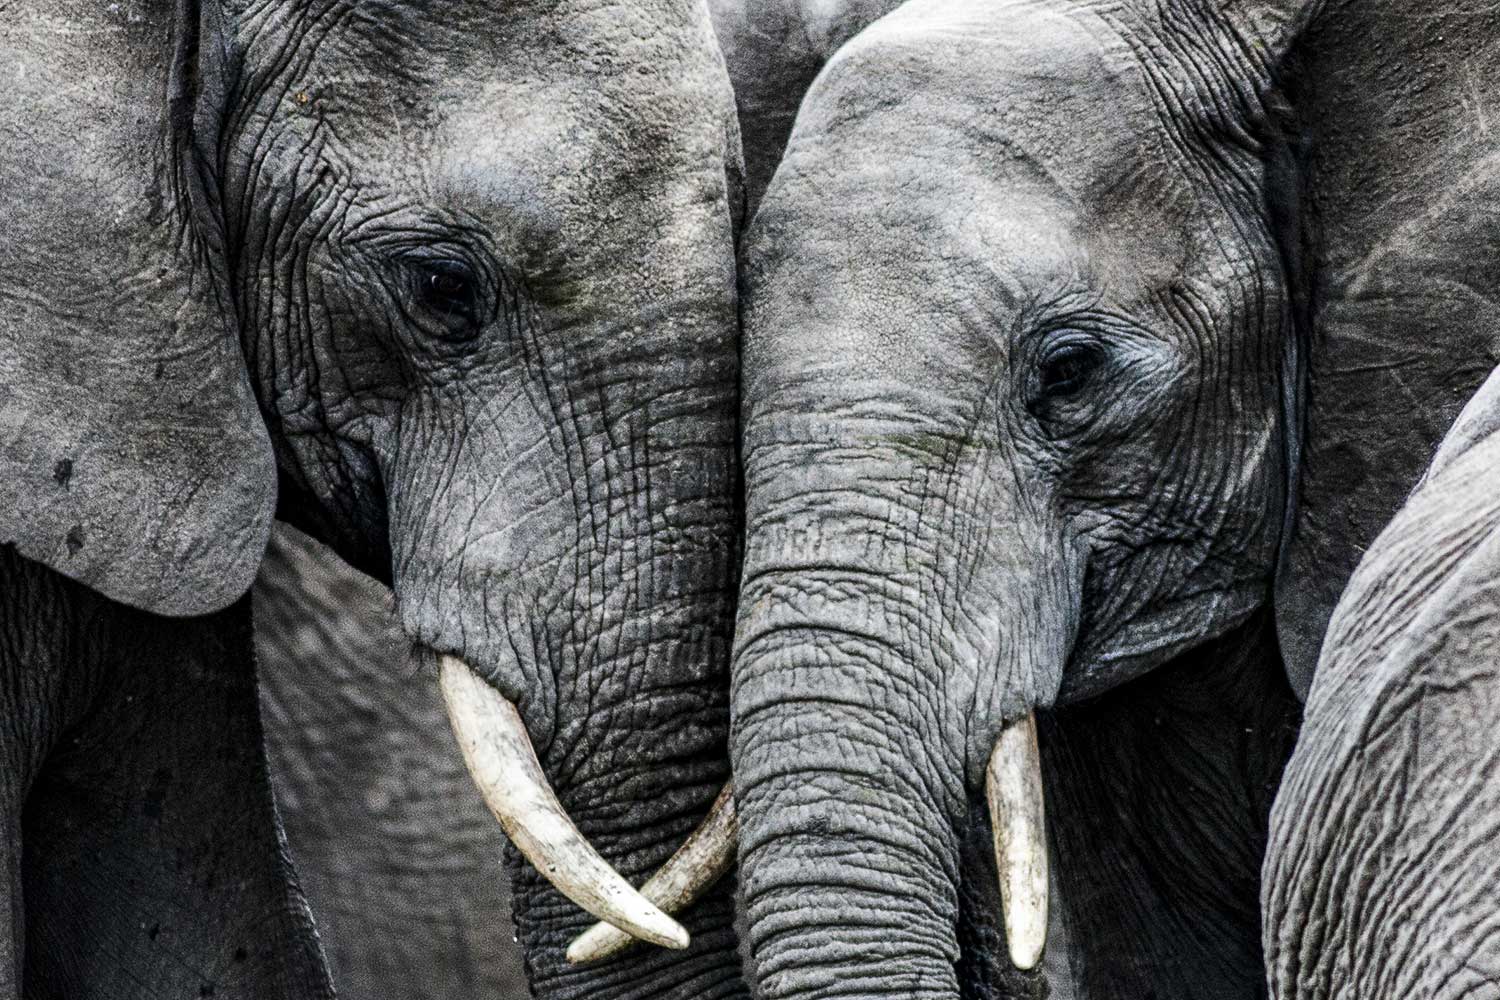 Two elephants showing affection for each other.